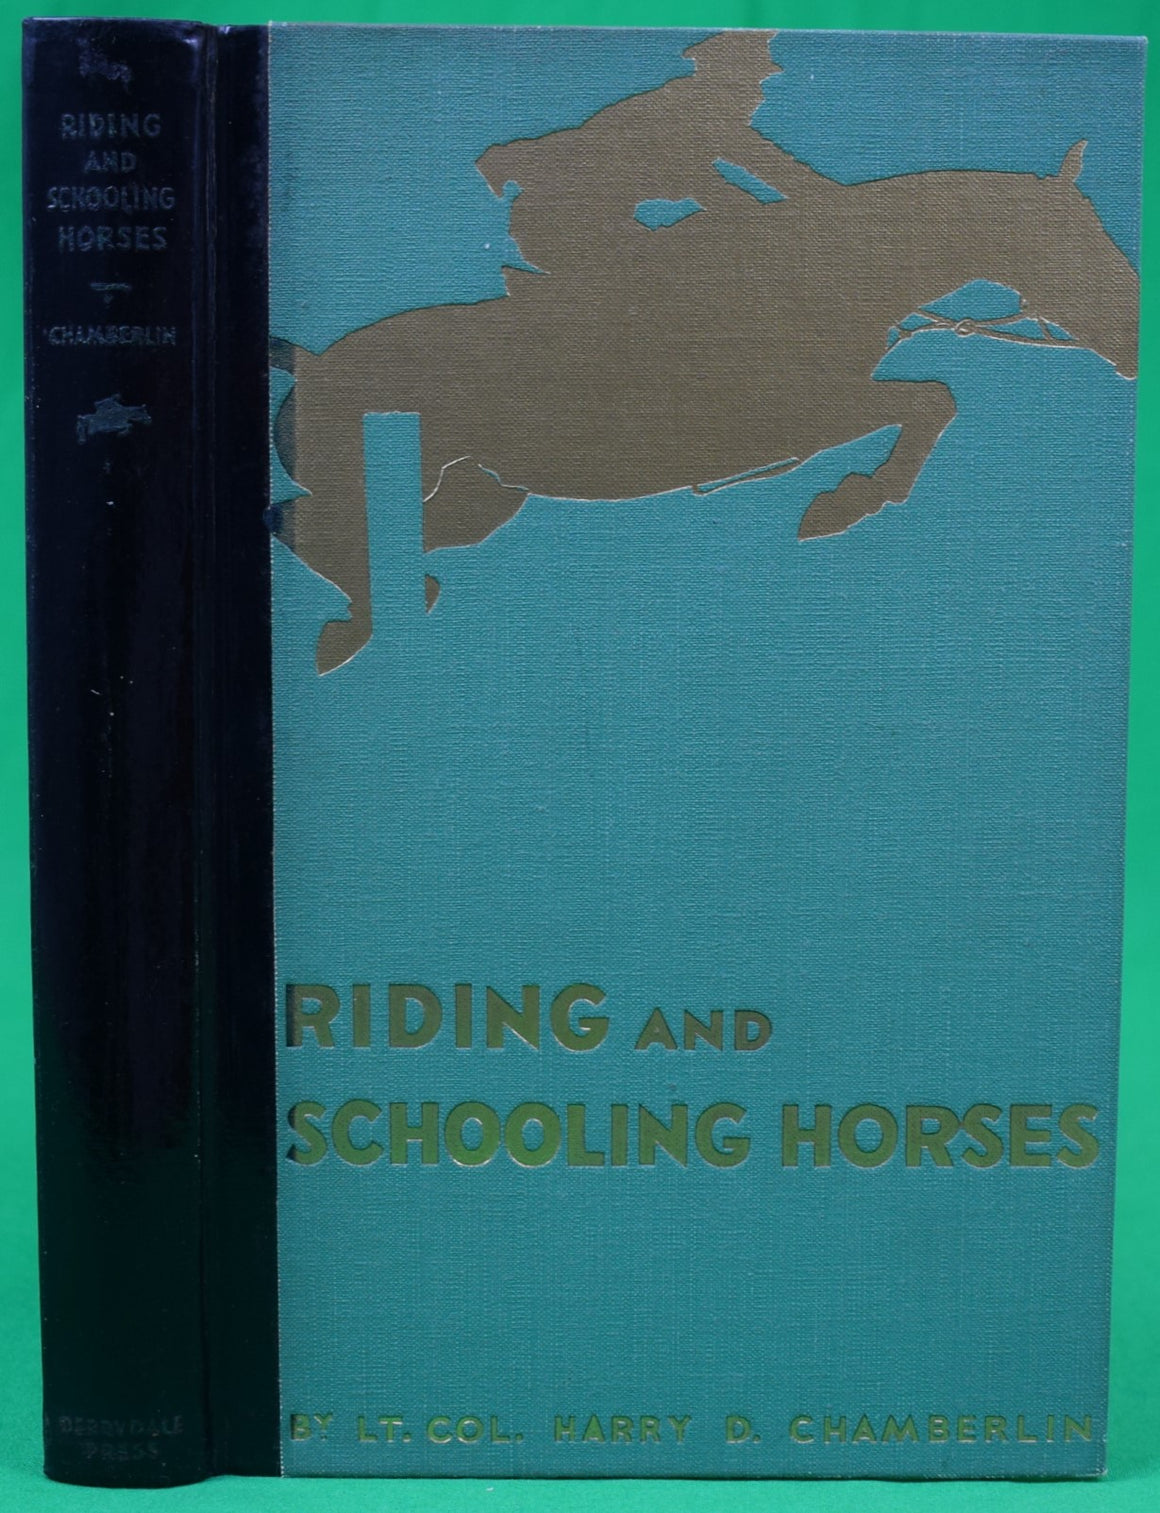 "Riding And Schooling Horses" 1934 CHAMBERLIN, Harry D.